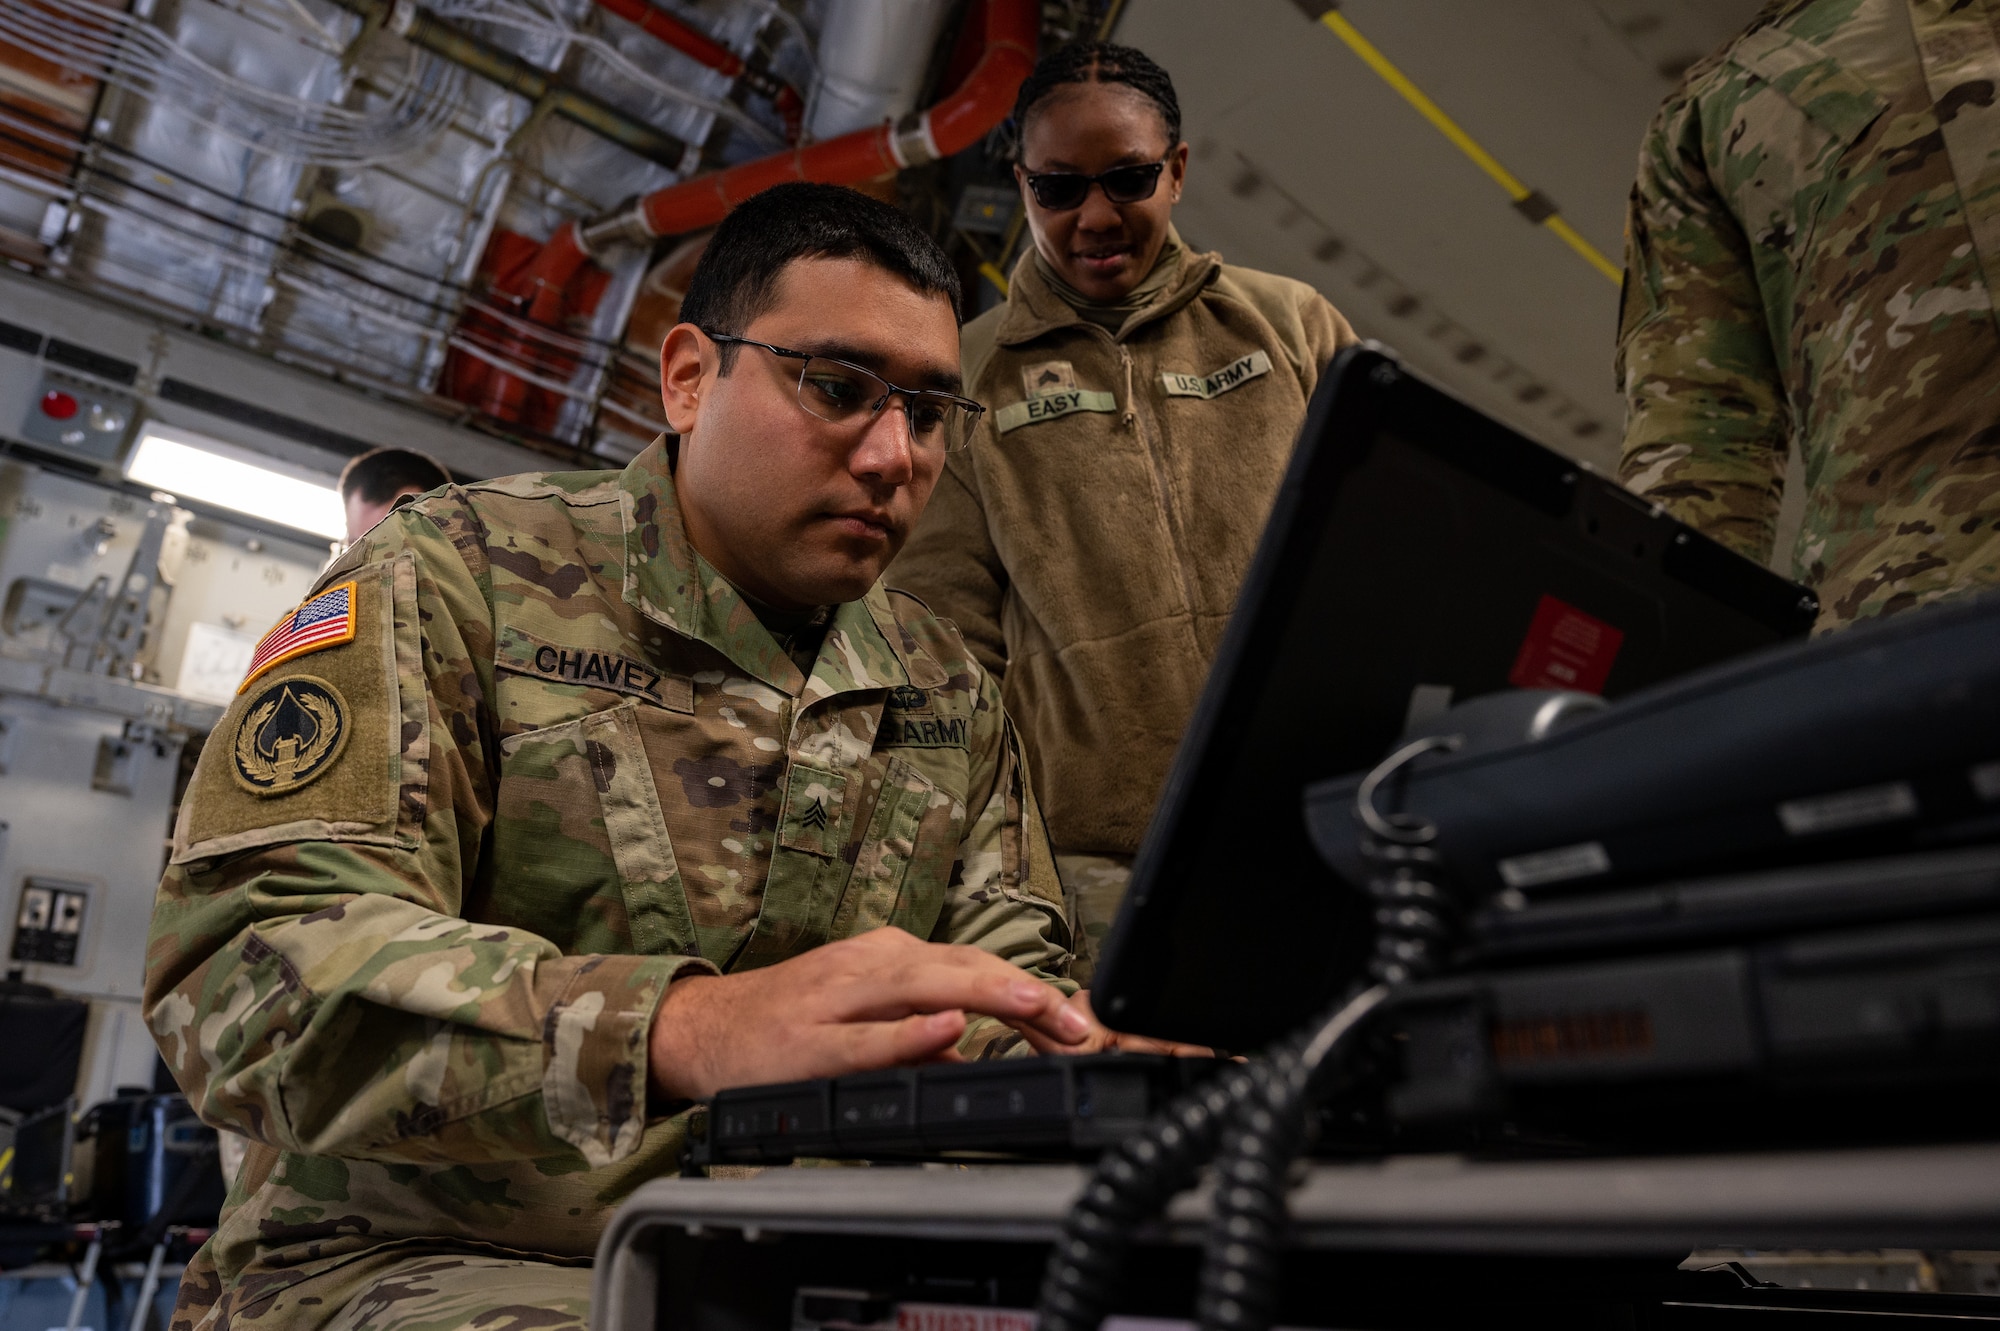 U.S Army Sgt. Ryan Chavez, left, and Sgt. Monique Easy, Joint Communications Support Element Soldiers, MacDill Air Force Base, Florida, work on setting up the Command and Control Element during Black Flag 23-1 at Nellis Air Force Base, Nevada, Feb. 23, 2023. Airmen and Soldiers executed mission sets that demonstrated the ability to provide integral communication through accessing Department of Defense computer networks, employing multiple tactical data links, and communicating with aircraft. (U.S. Air Force photo by Airman 1st Class Josey Blades)